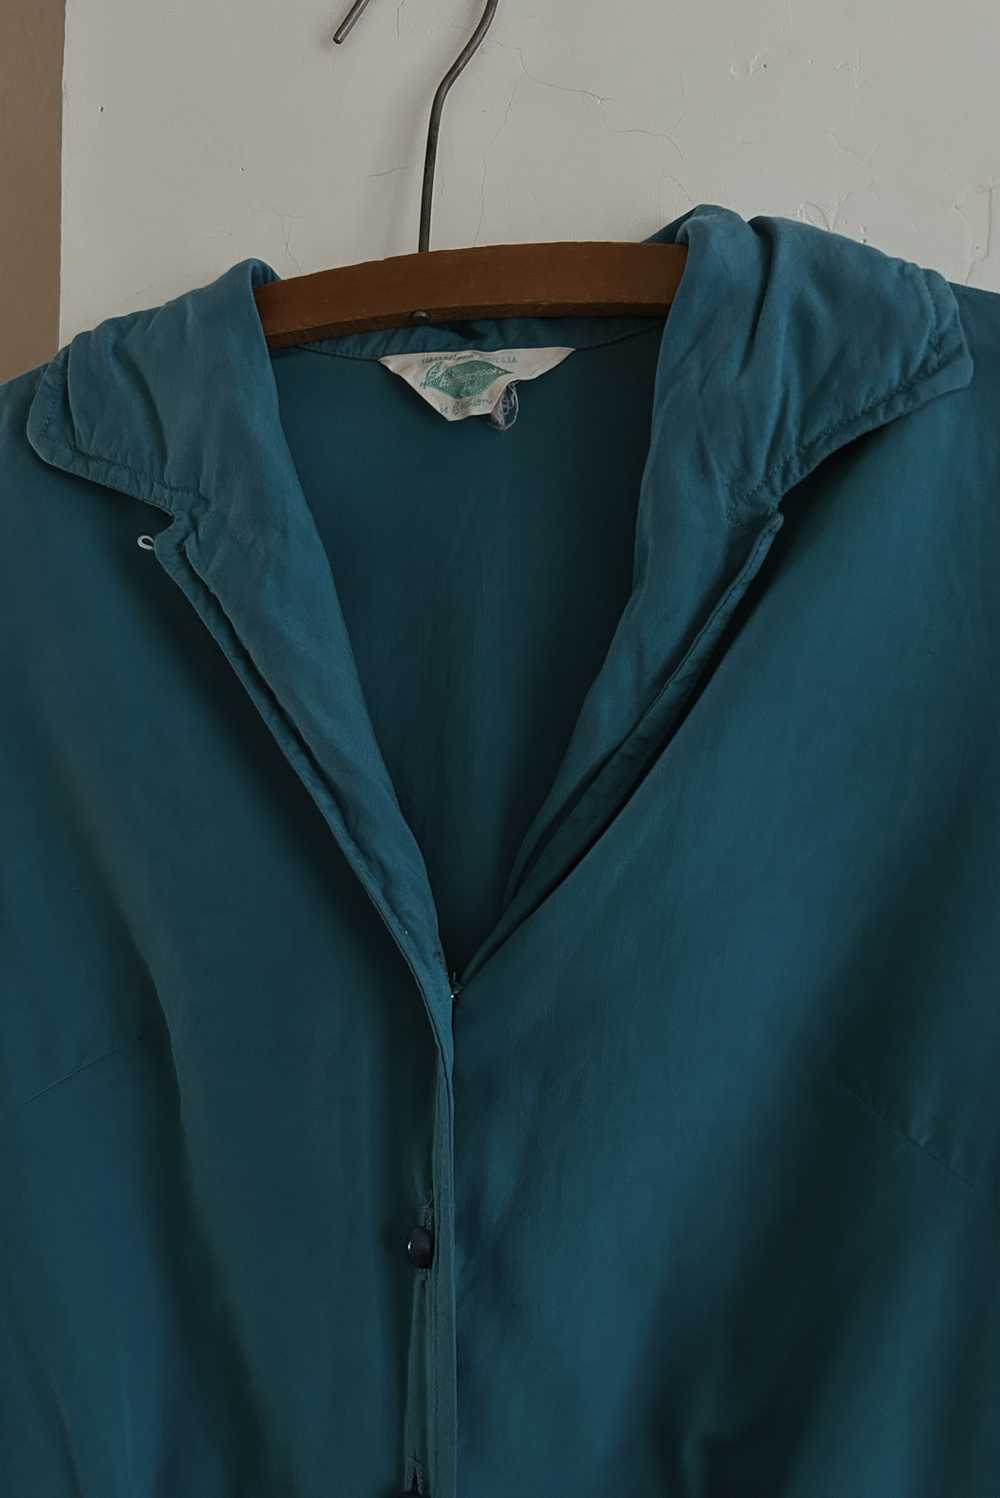 1950's TEAL SILK BUTTON BLOUSE - image 4